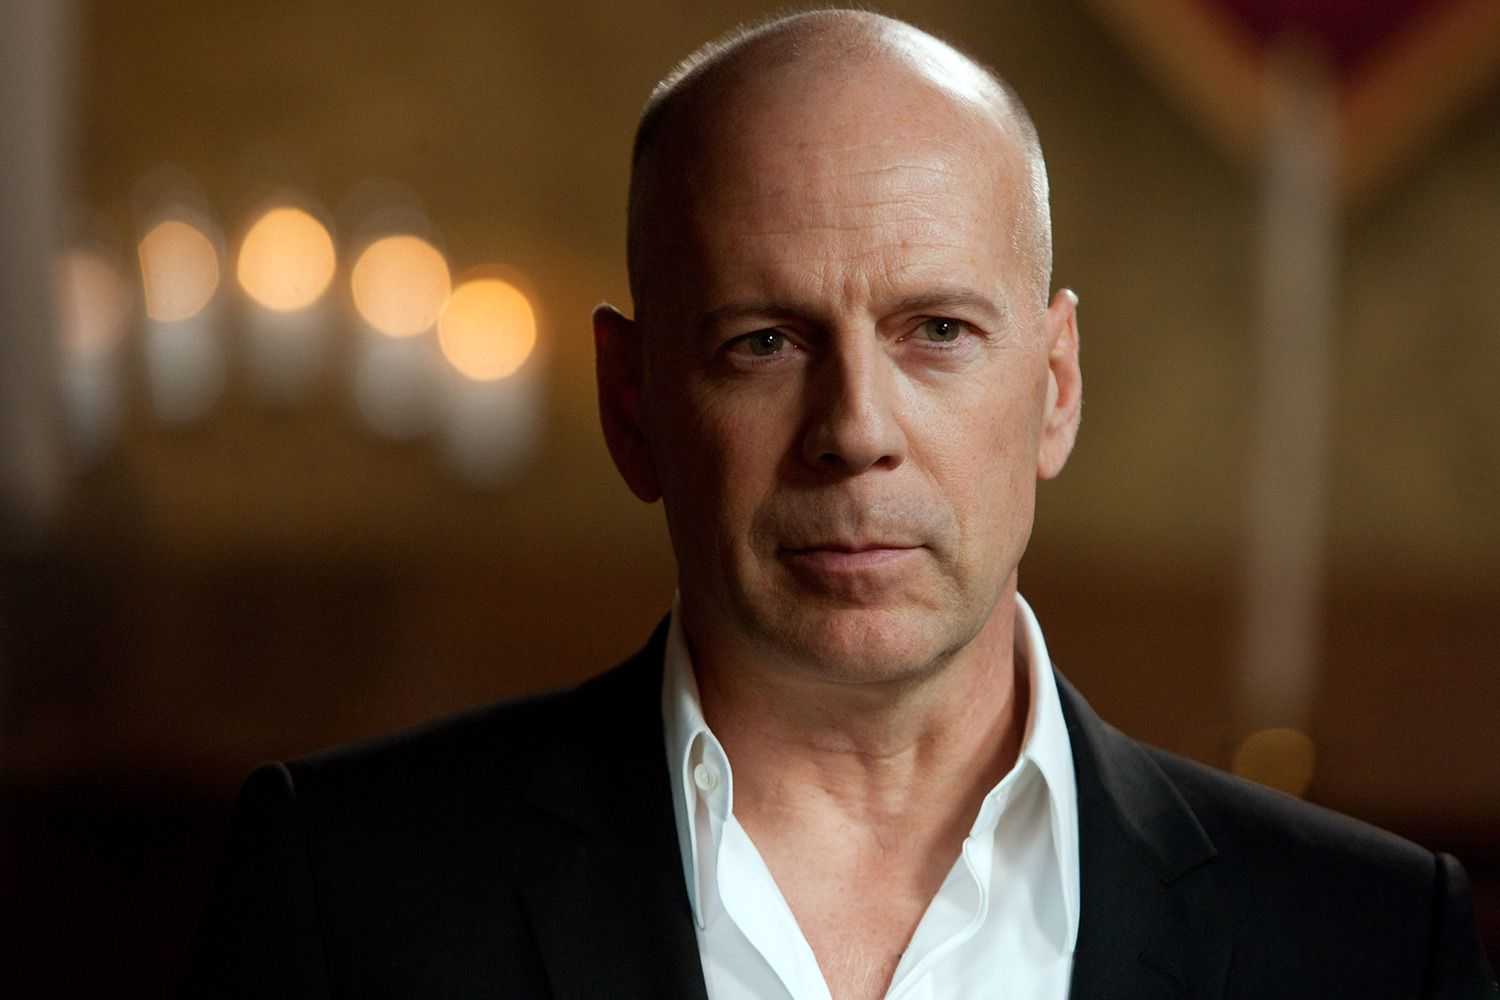 Bruce Willis' brave battle with aphasia: A Hollywood legend's untold story